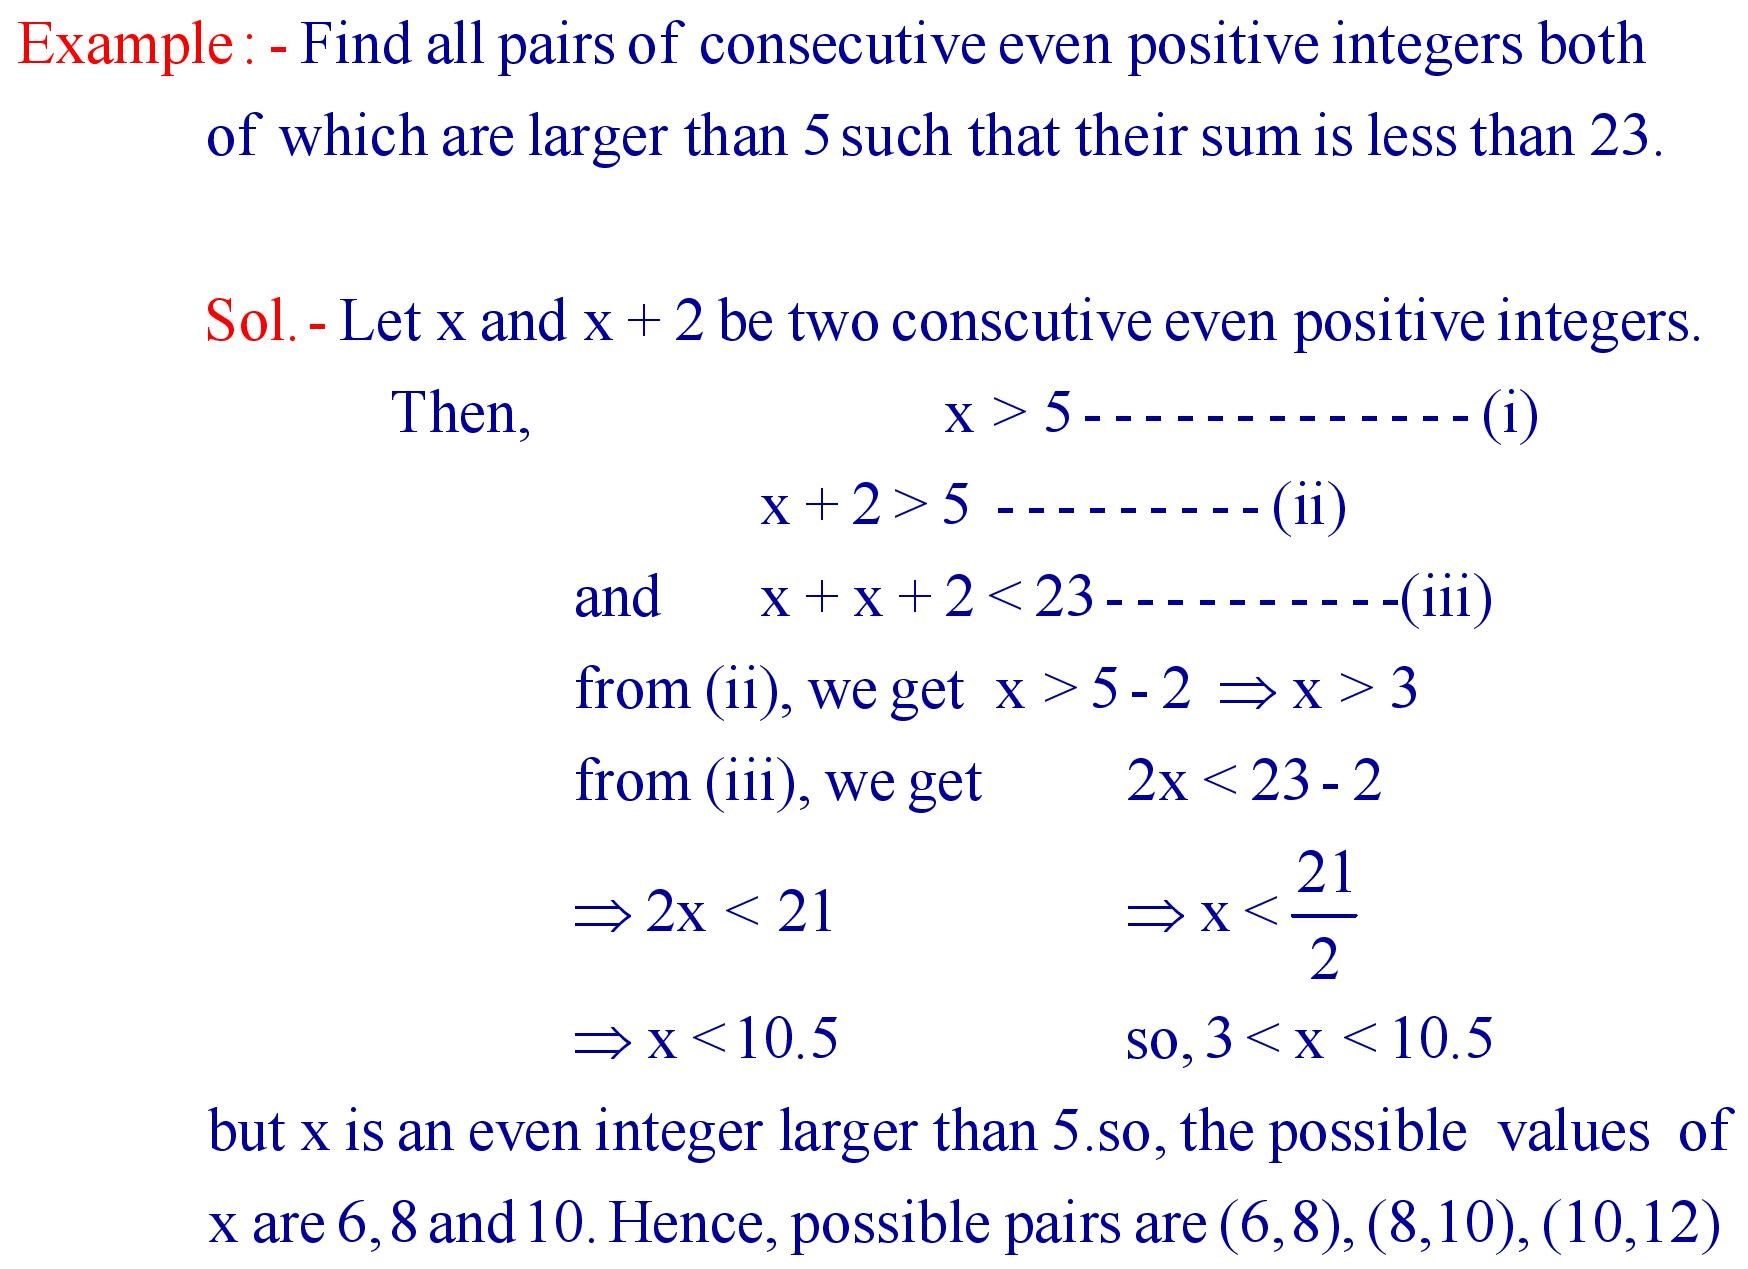 Problems based on solving Inequations